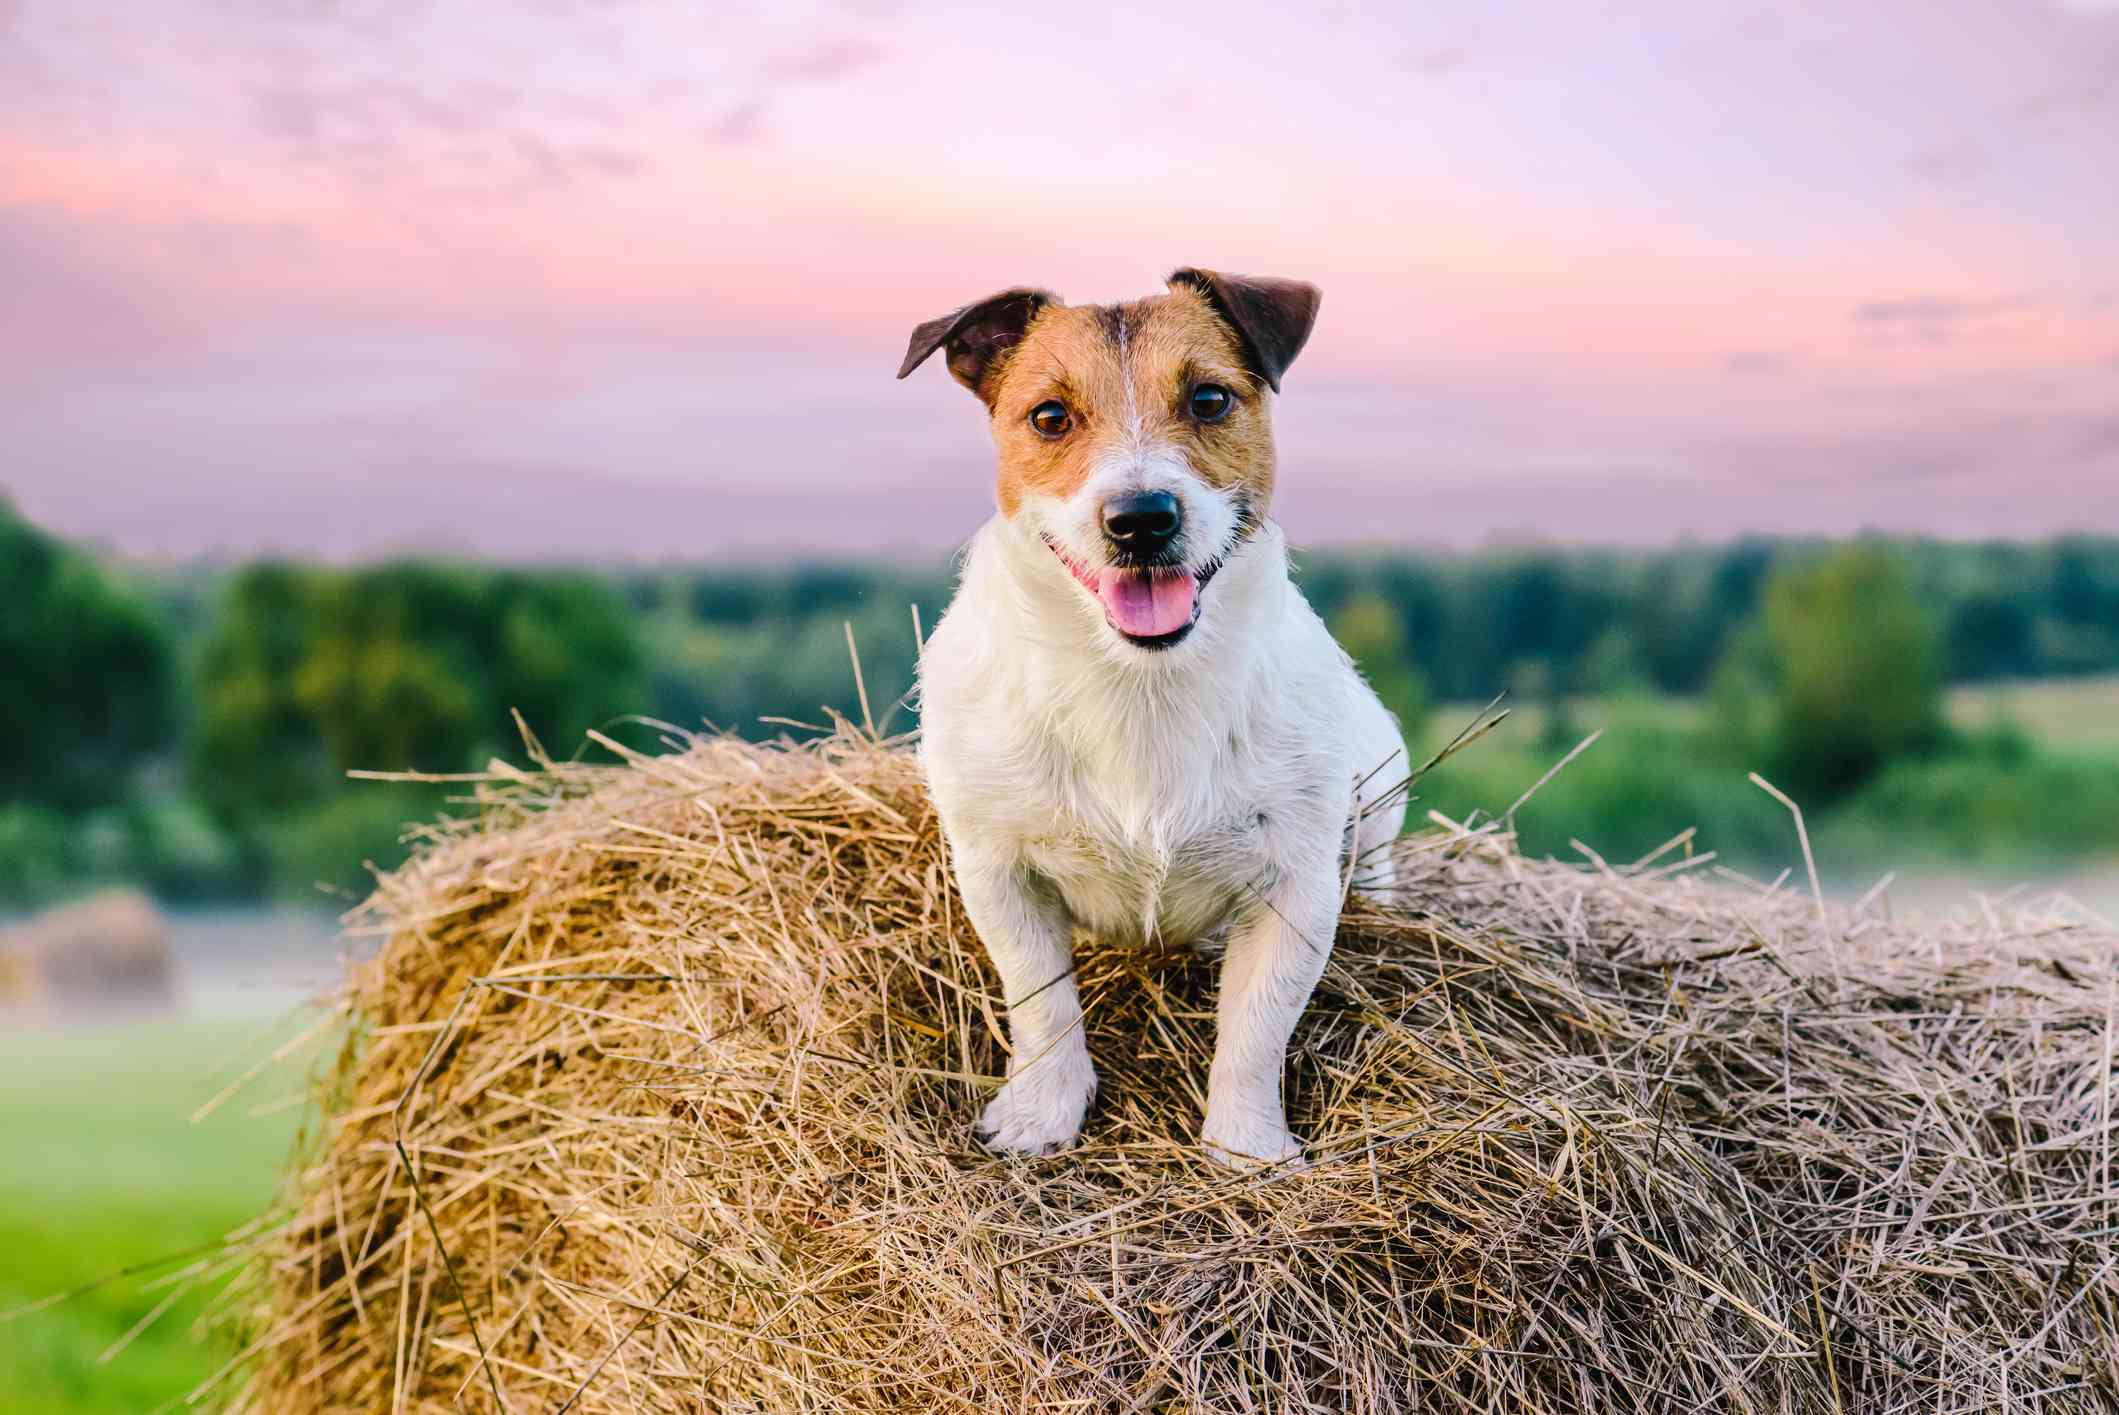 Jack Russell Terrier on a hay bale